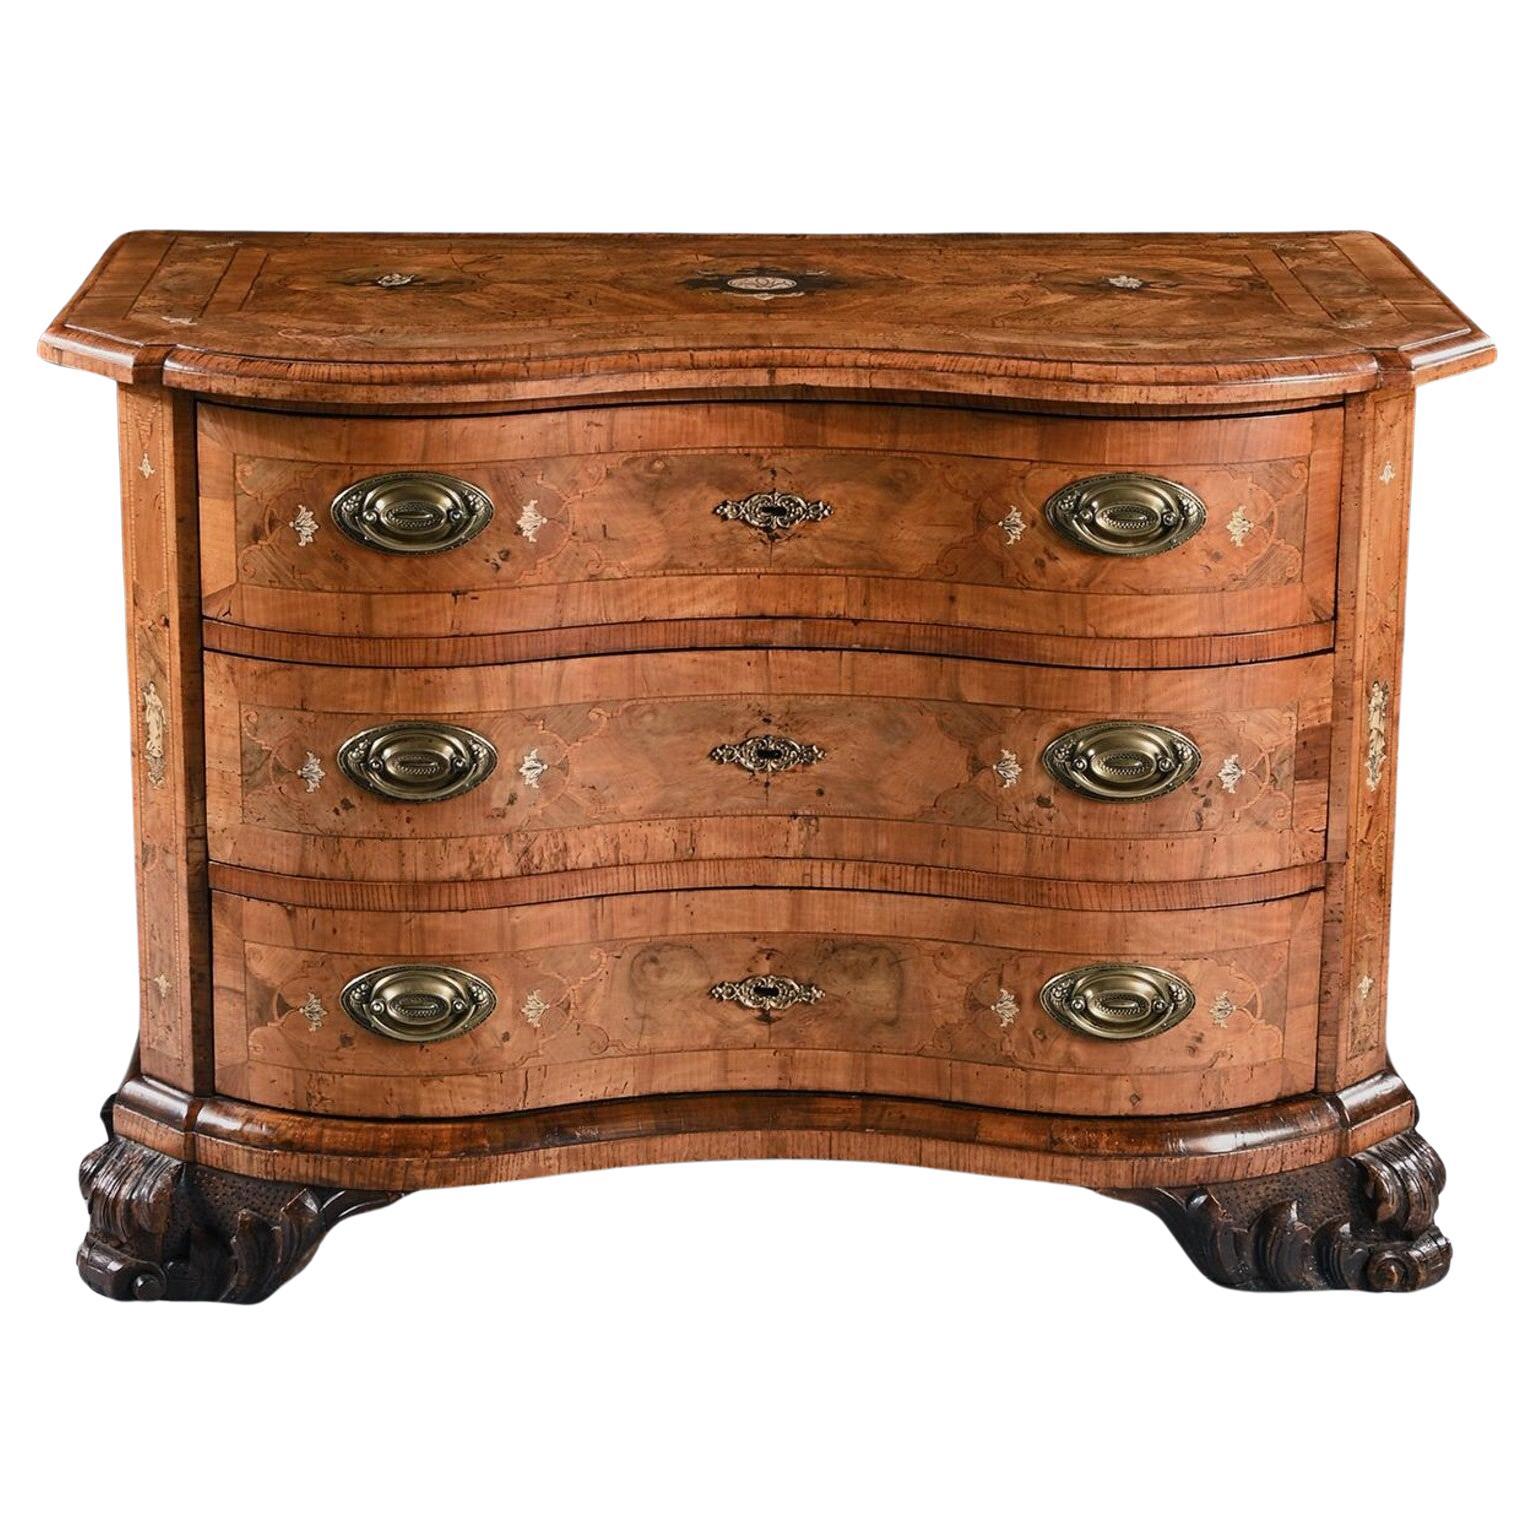 Rare Mid 18th Century German Walnut Pewter & Ivory Marquetry Serpentine Commode For Sale